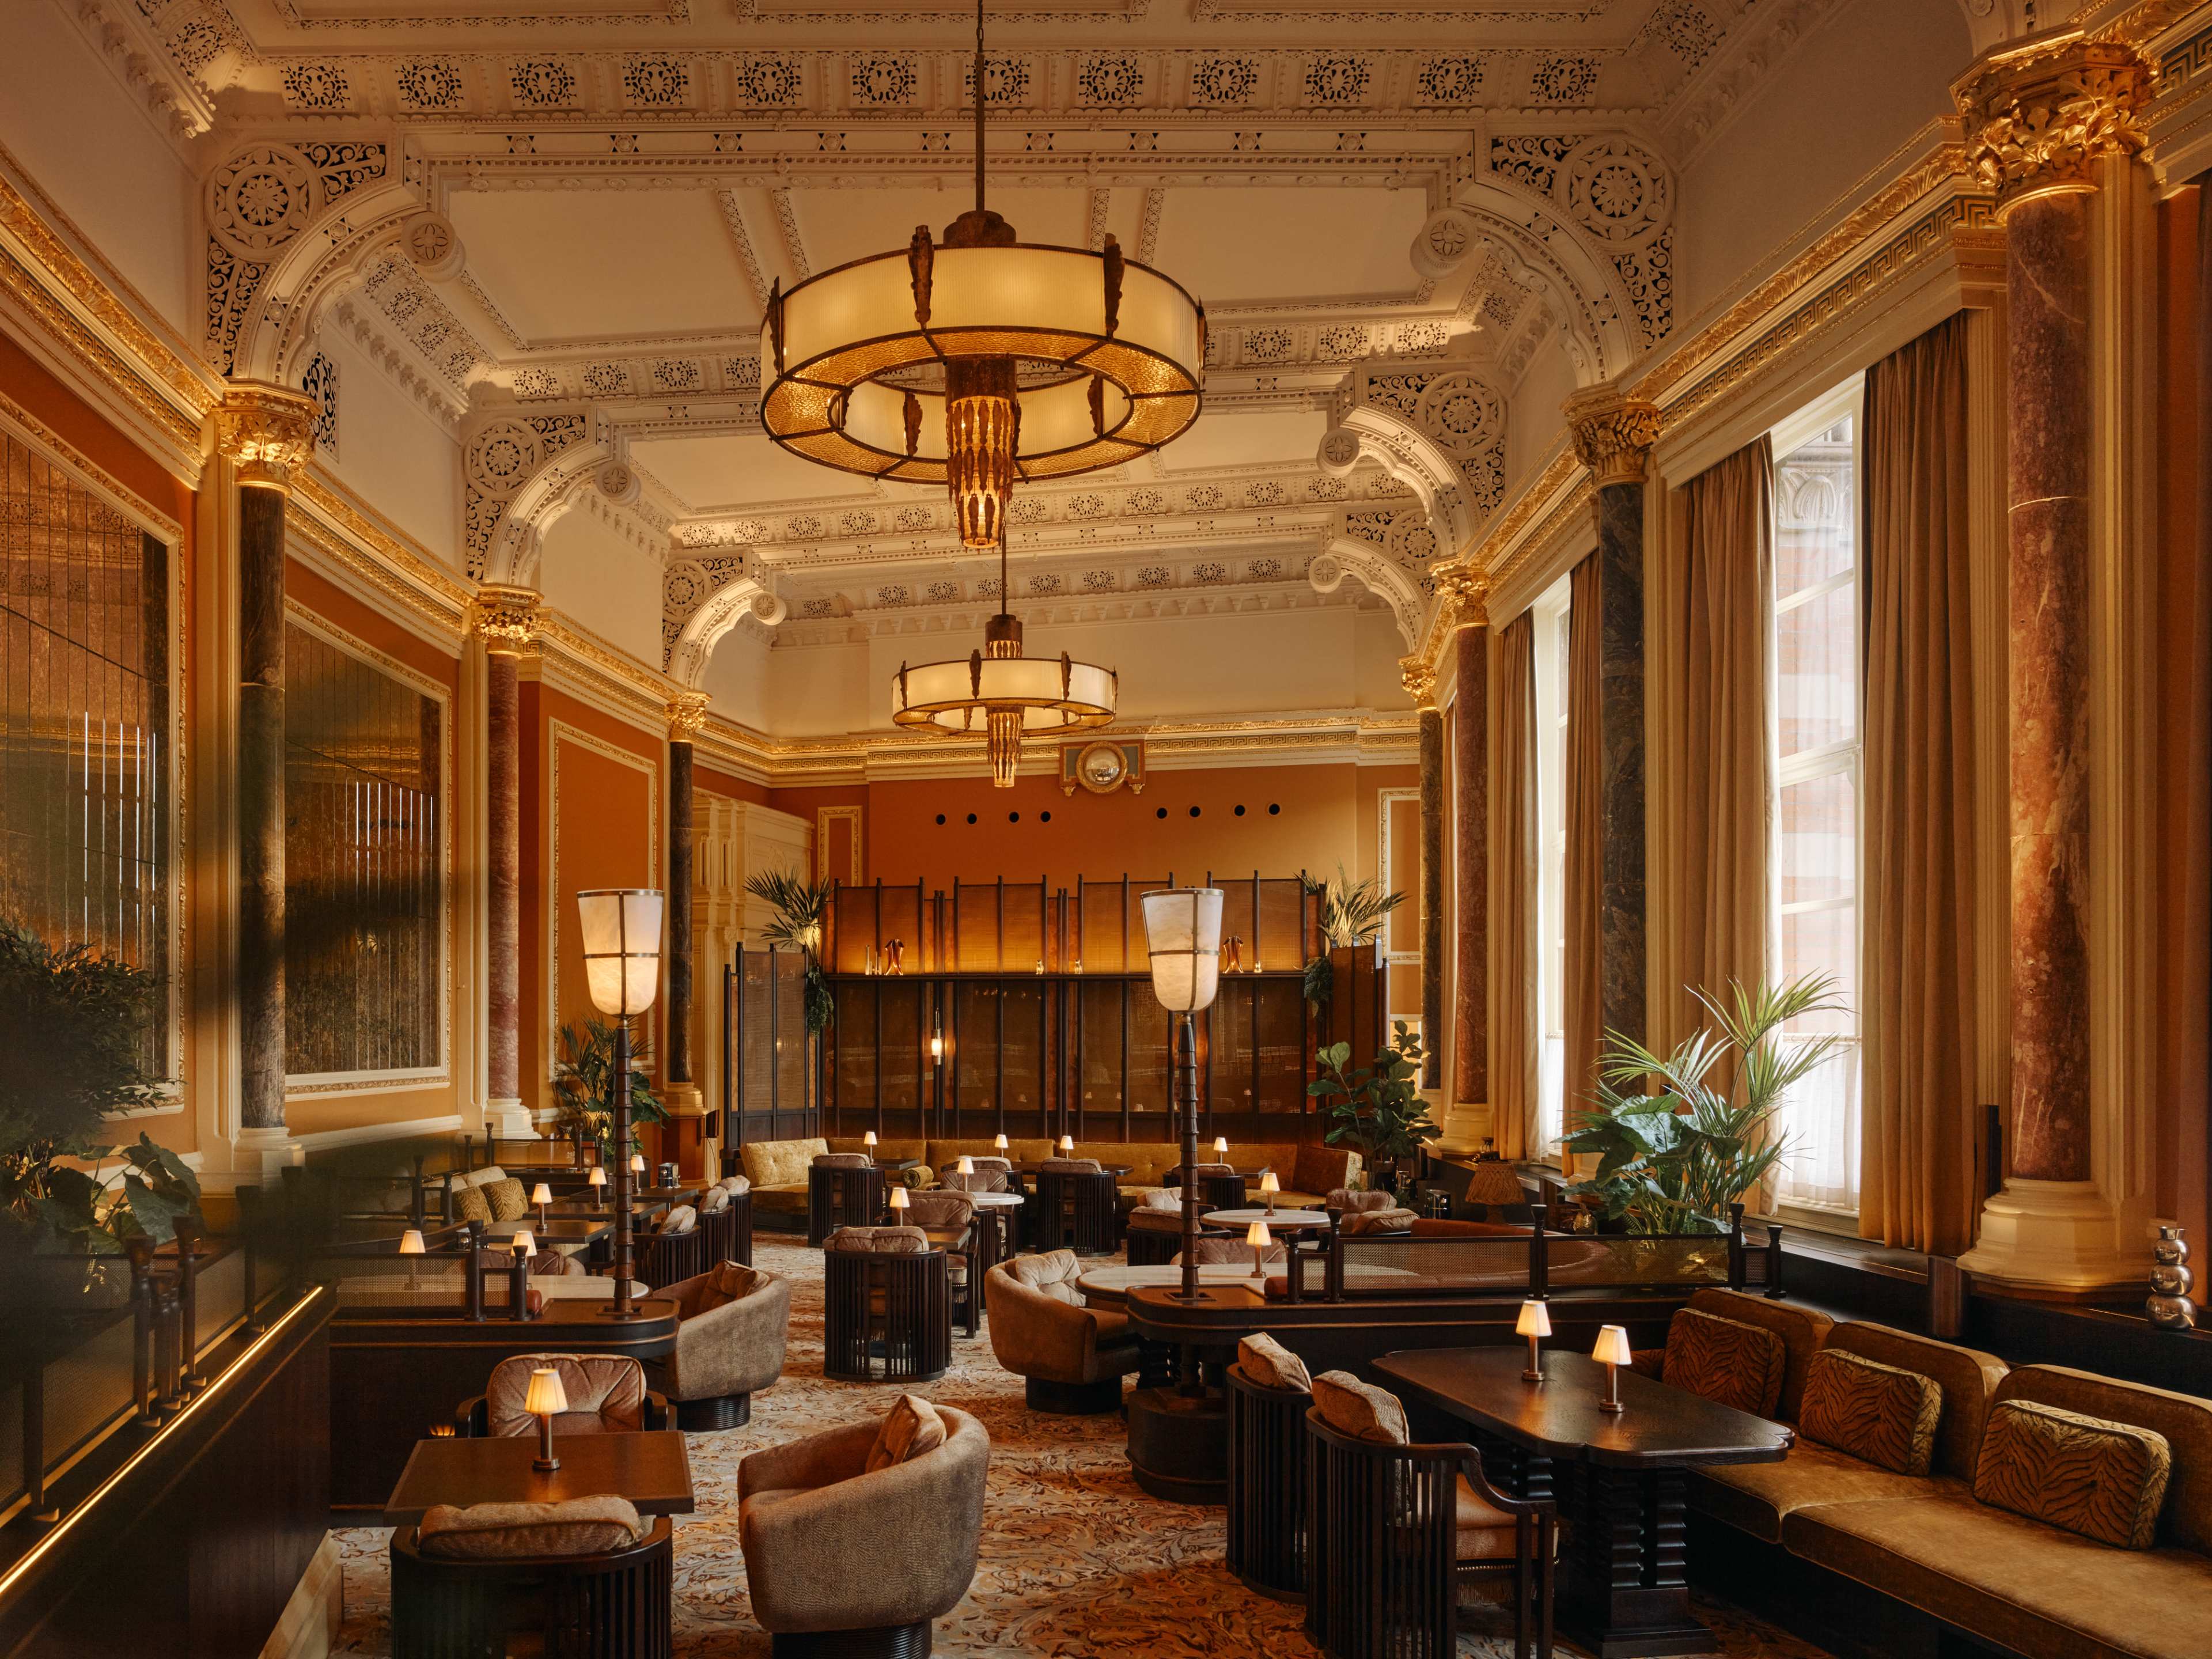 The interior of The Midland Grand Dining Room.